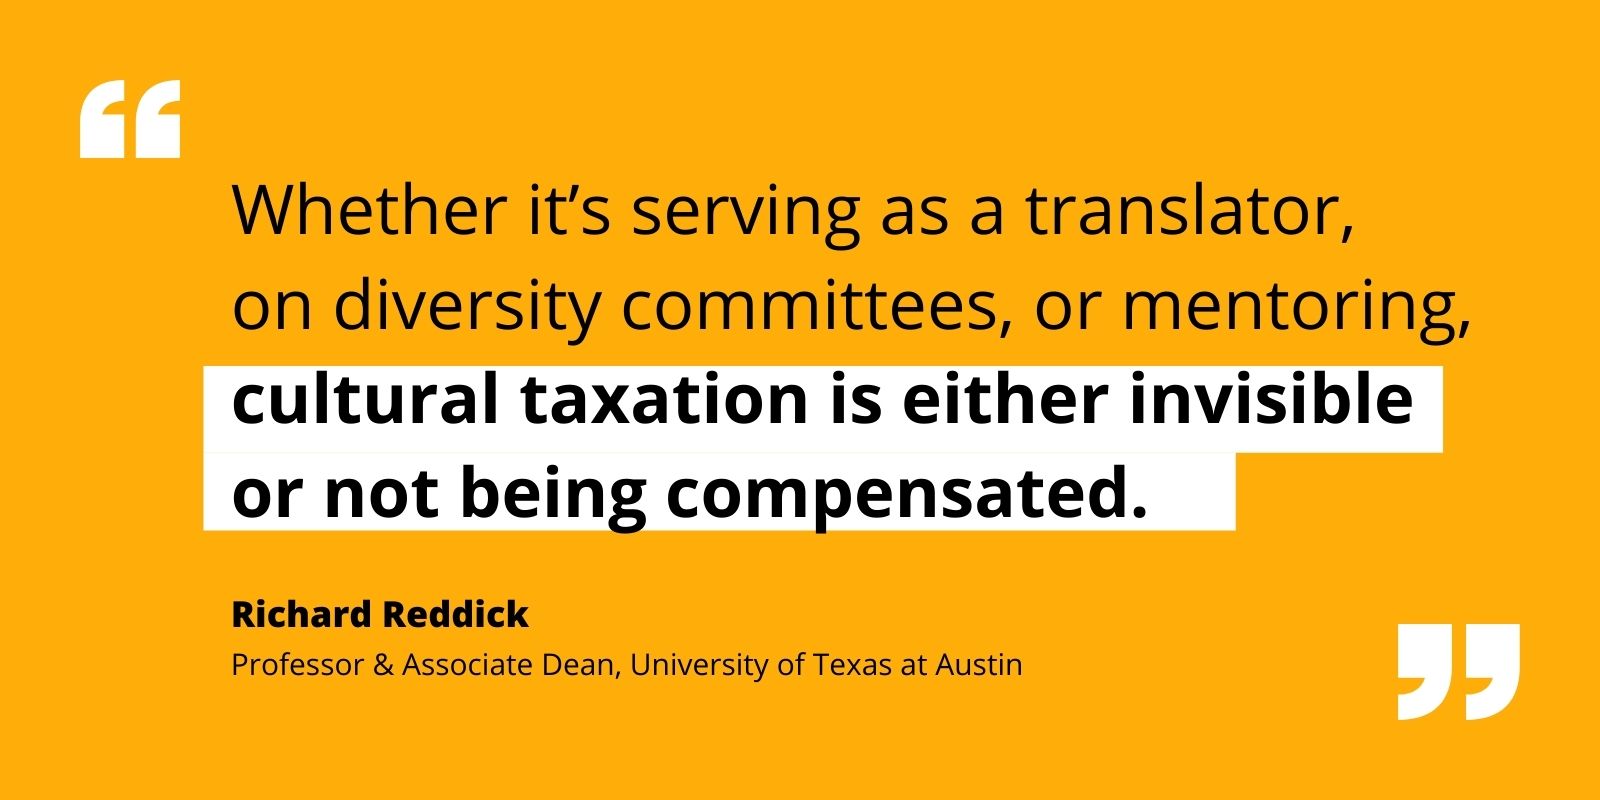 Quote by Richard Reddick re how cultural taxation is invisible or uncompensated work in academia by people of color.